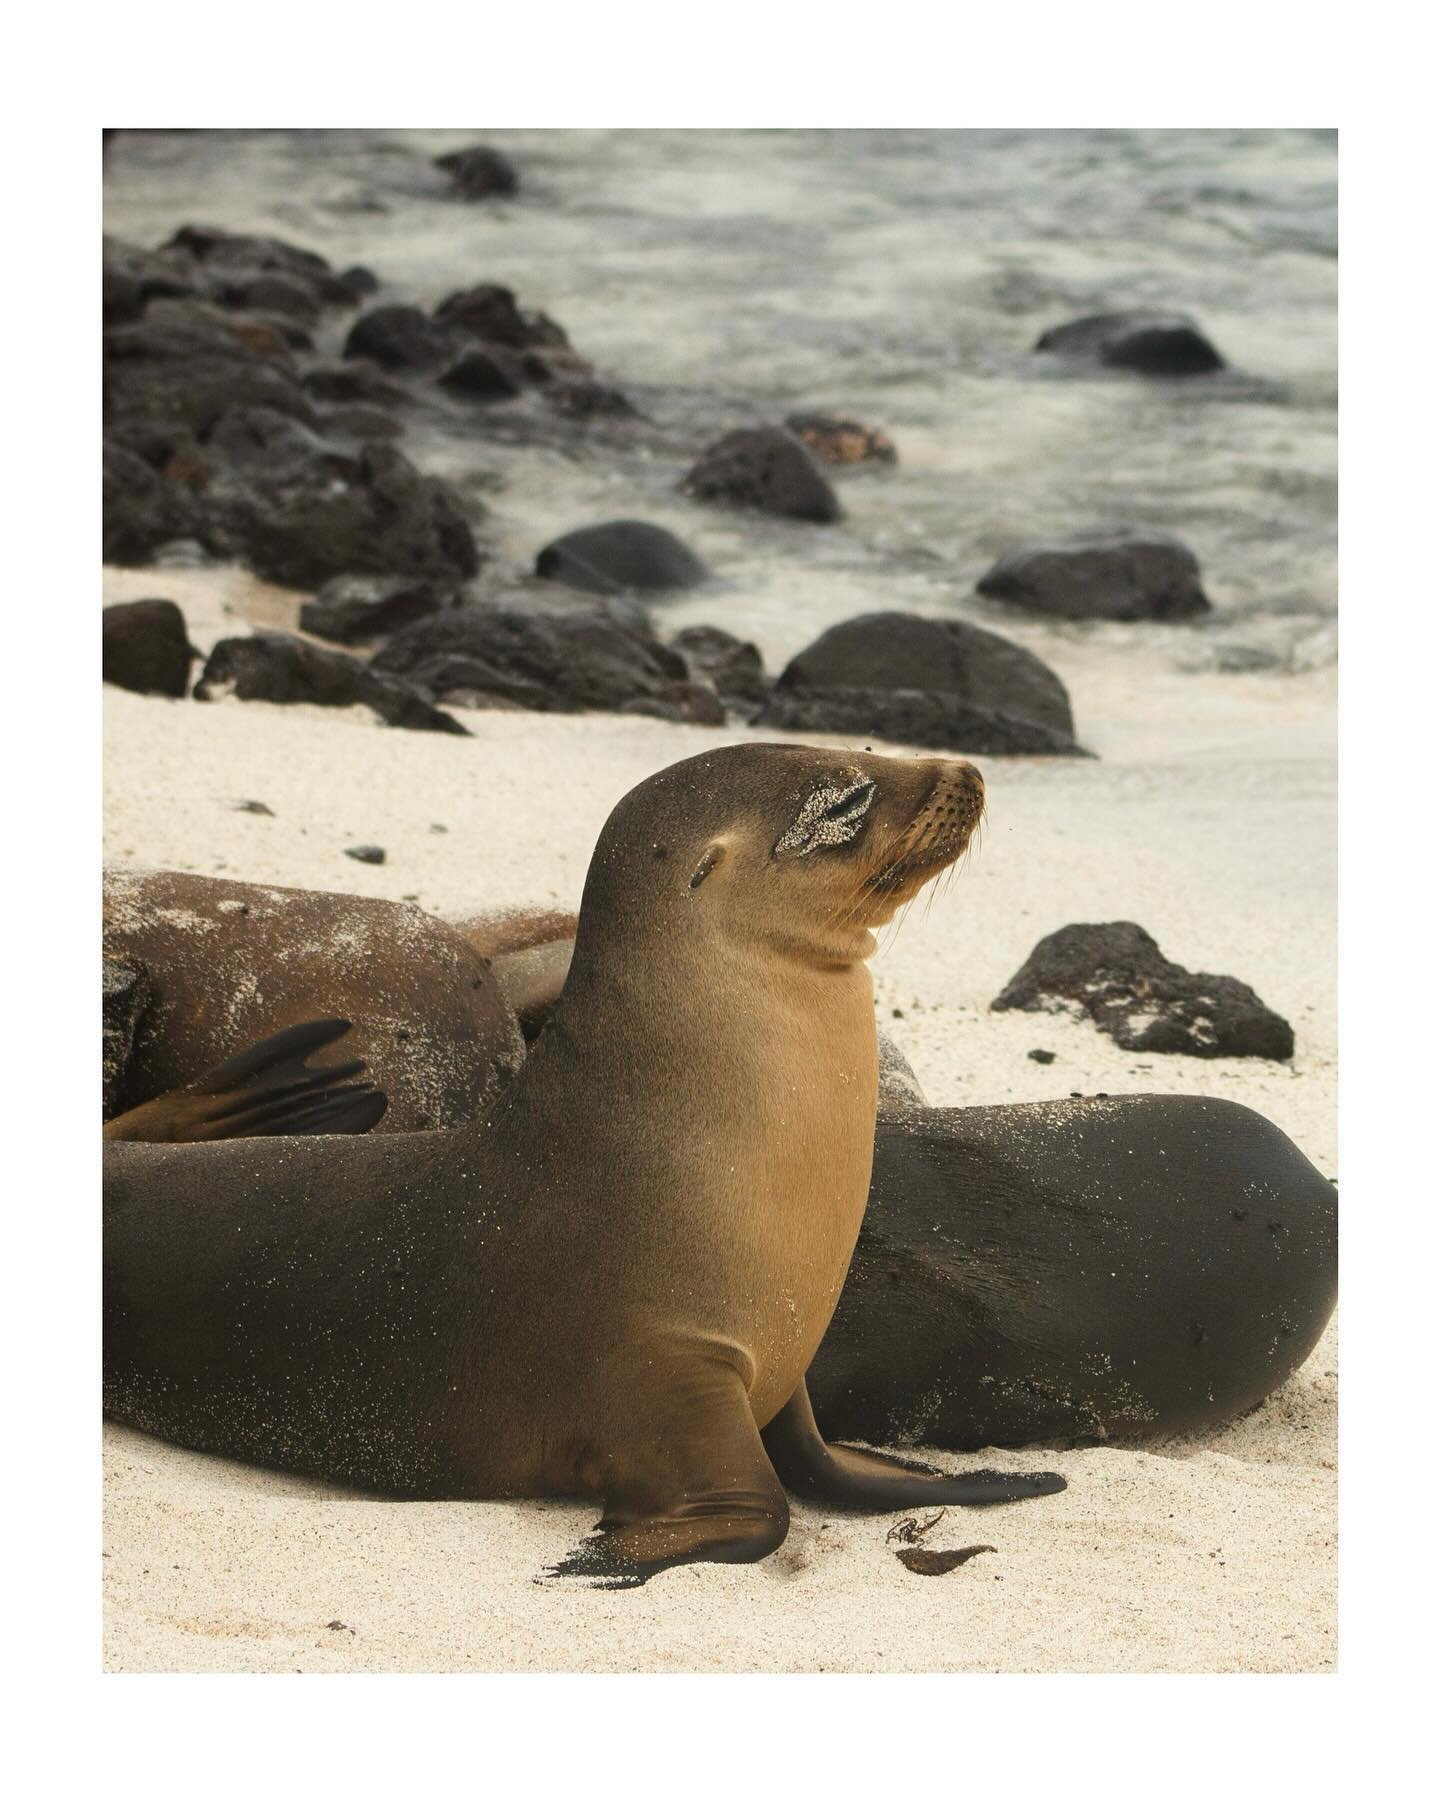 Oh, you thought I was done posting about the Galapagos? That&rsquo;s cute. Almost as cute as this baby sea lion. Almost.